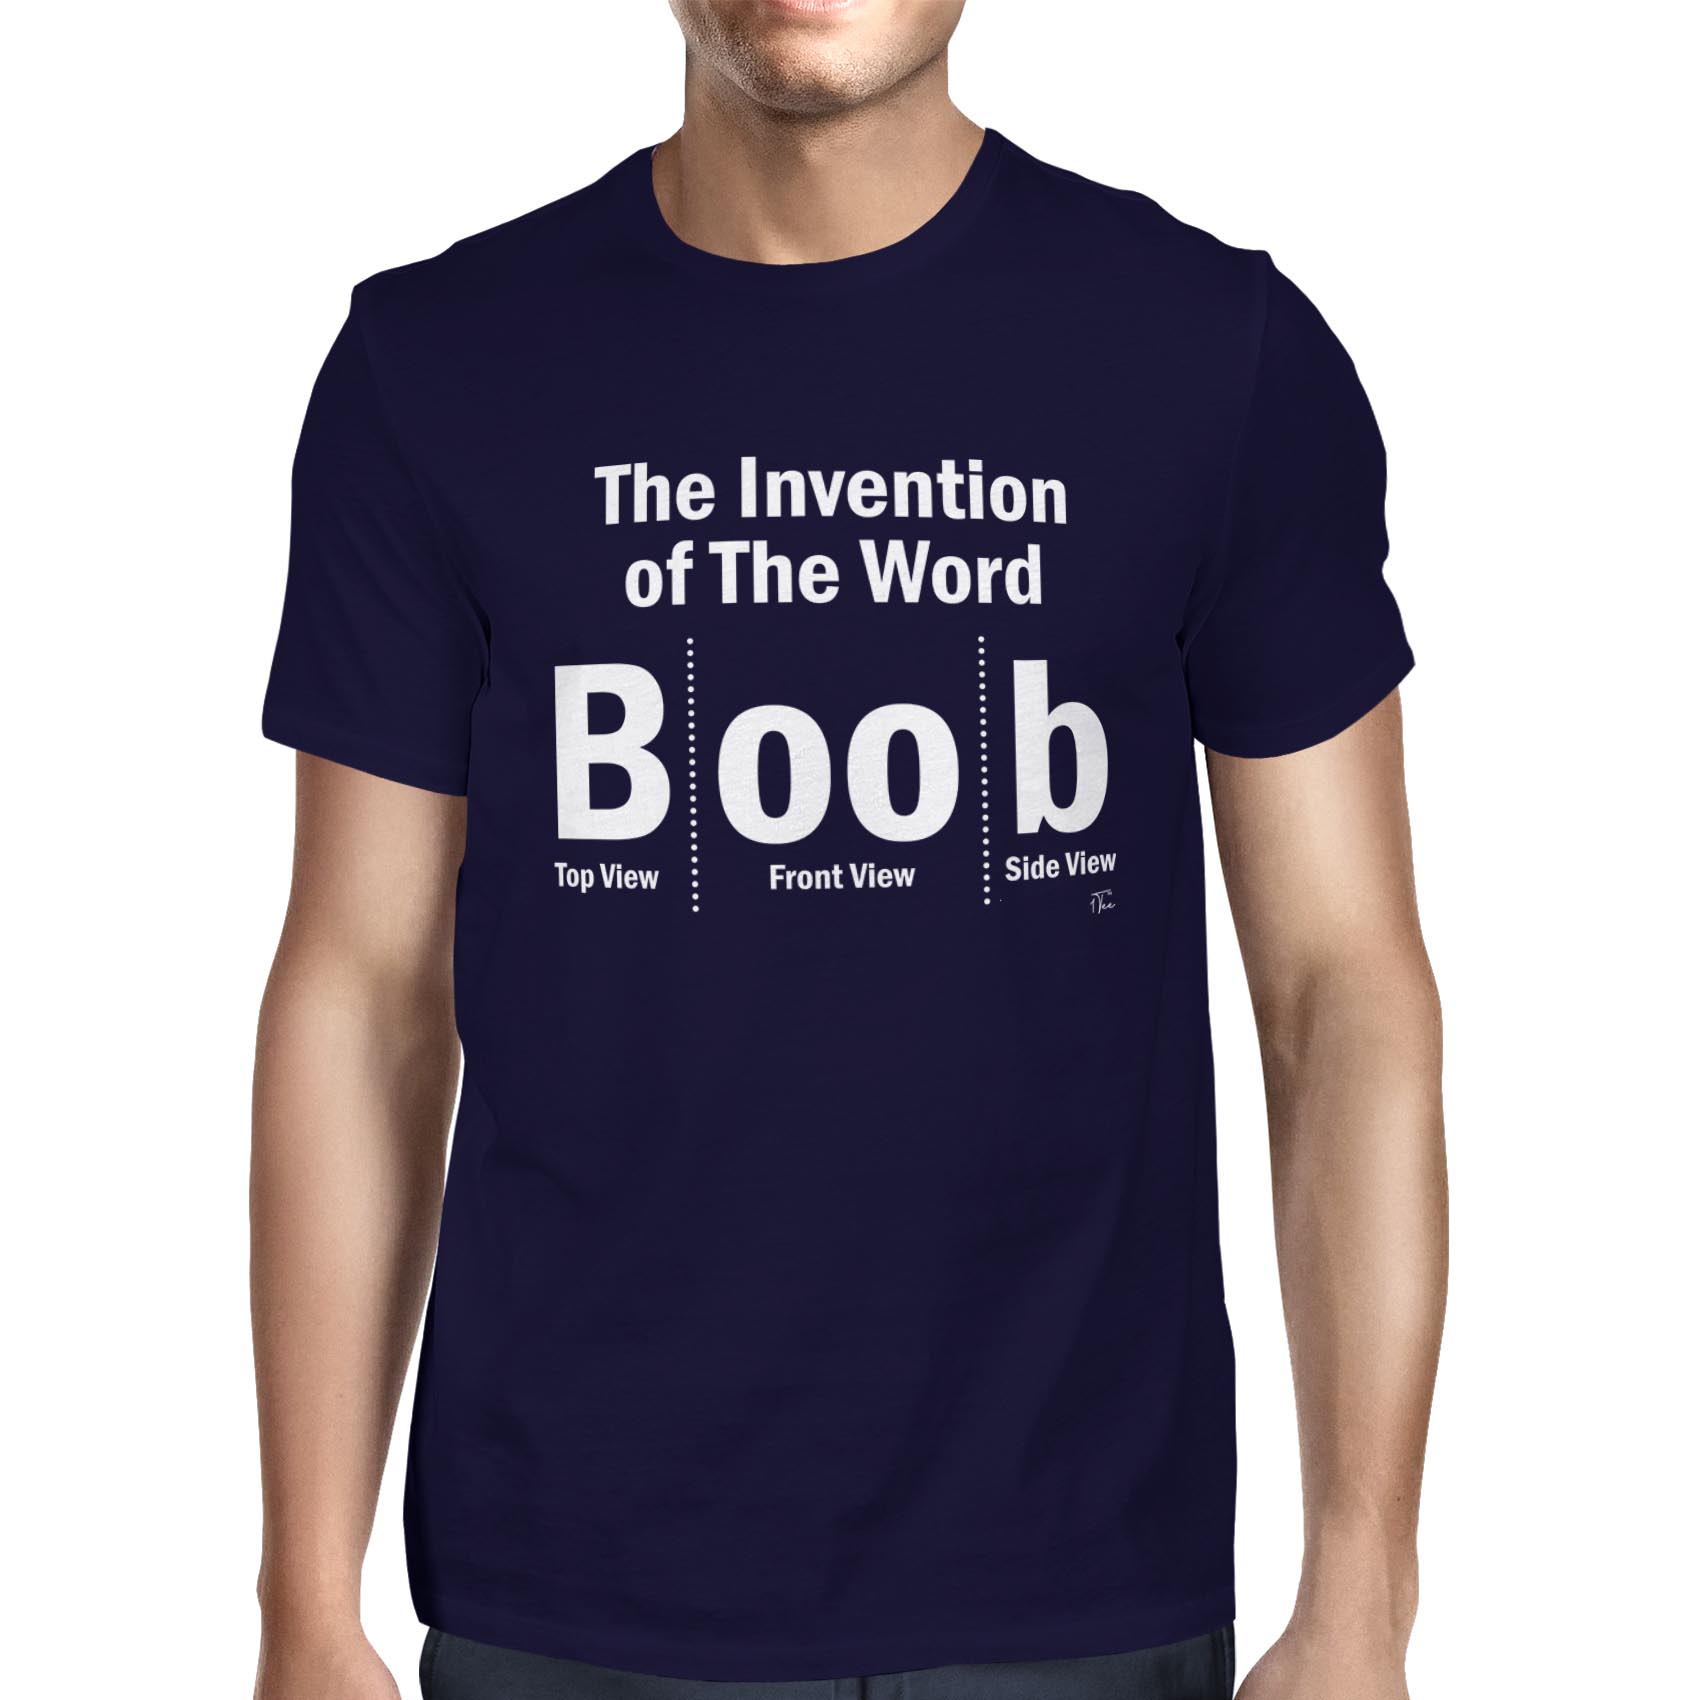 The Invention of the word BOOB (Top View, Front View, Side View